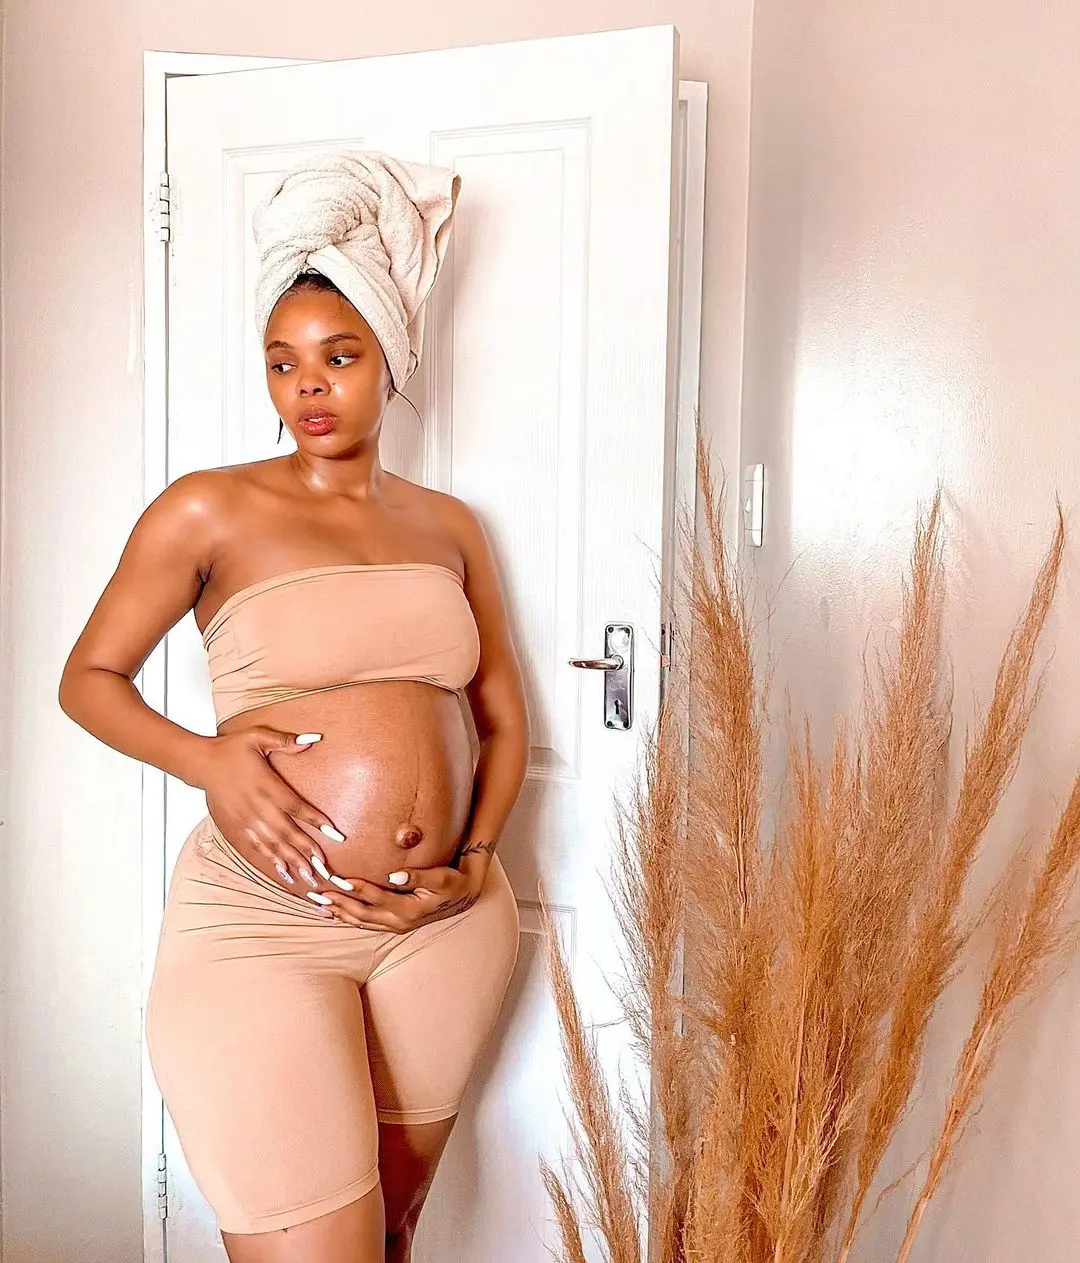 Trouble in paradise: Pregnant Londie London moves out of the house as husband gets another lady pregnant